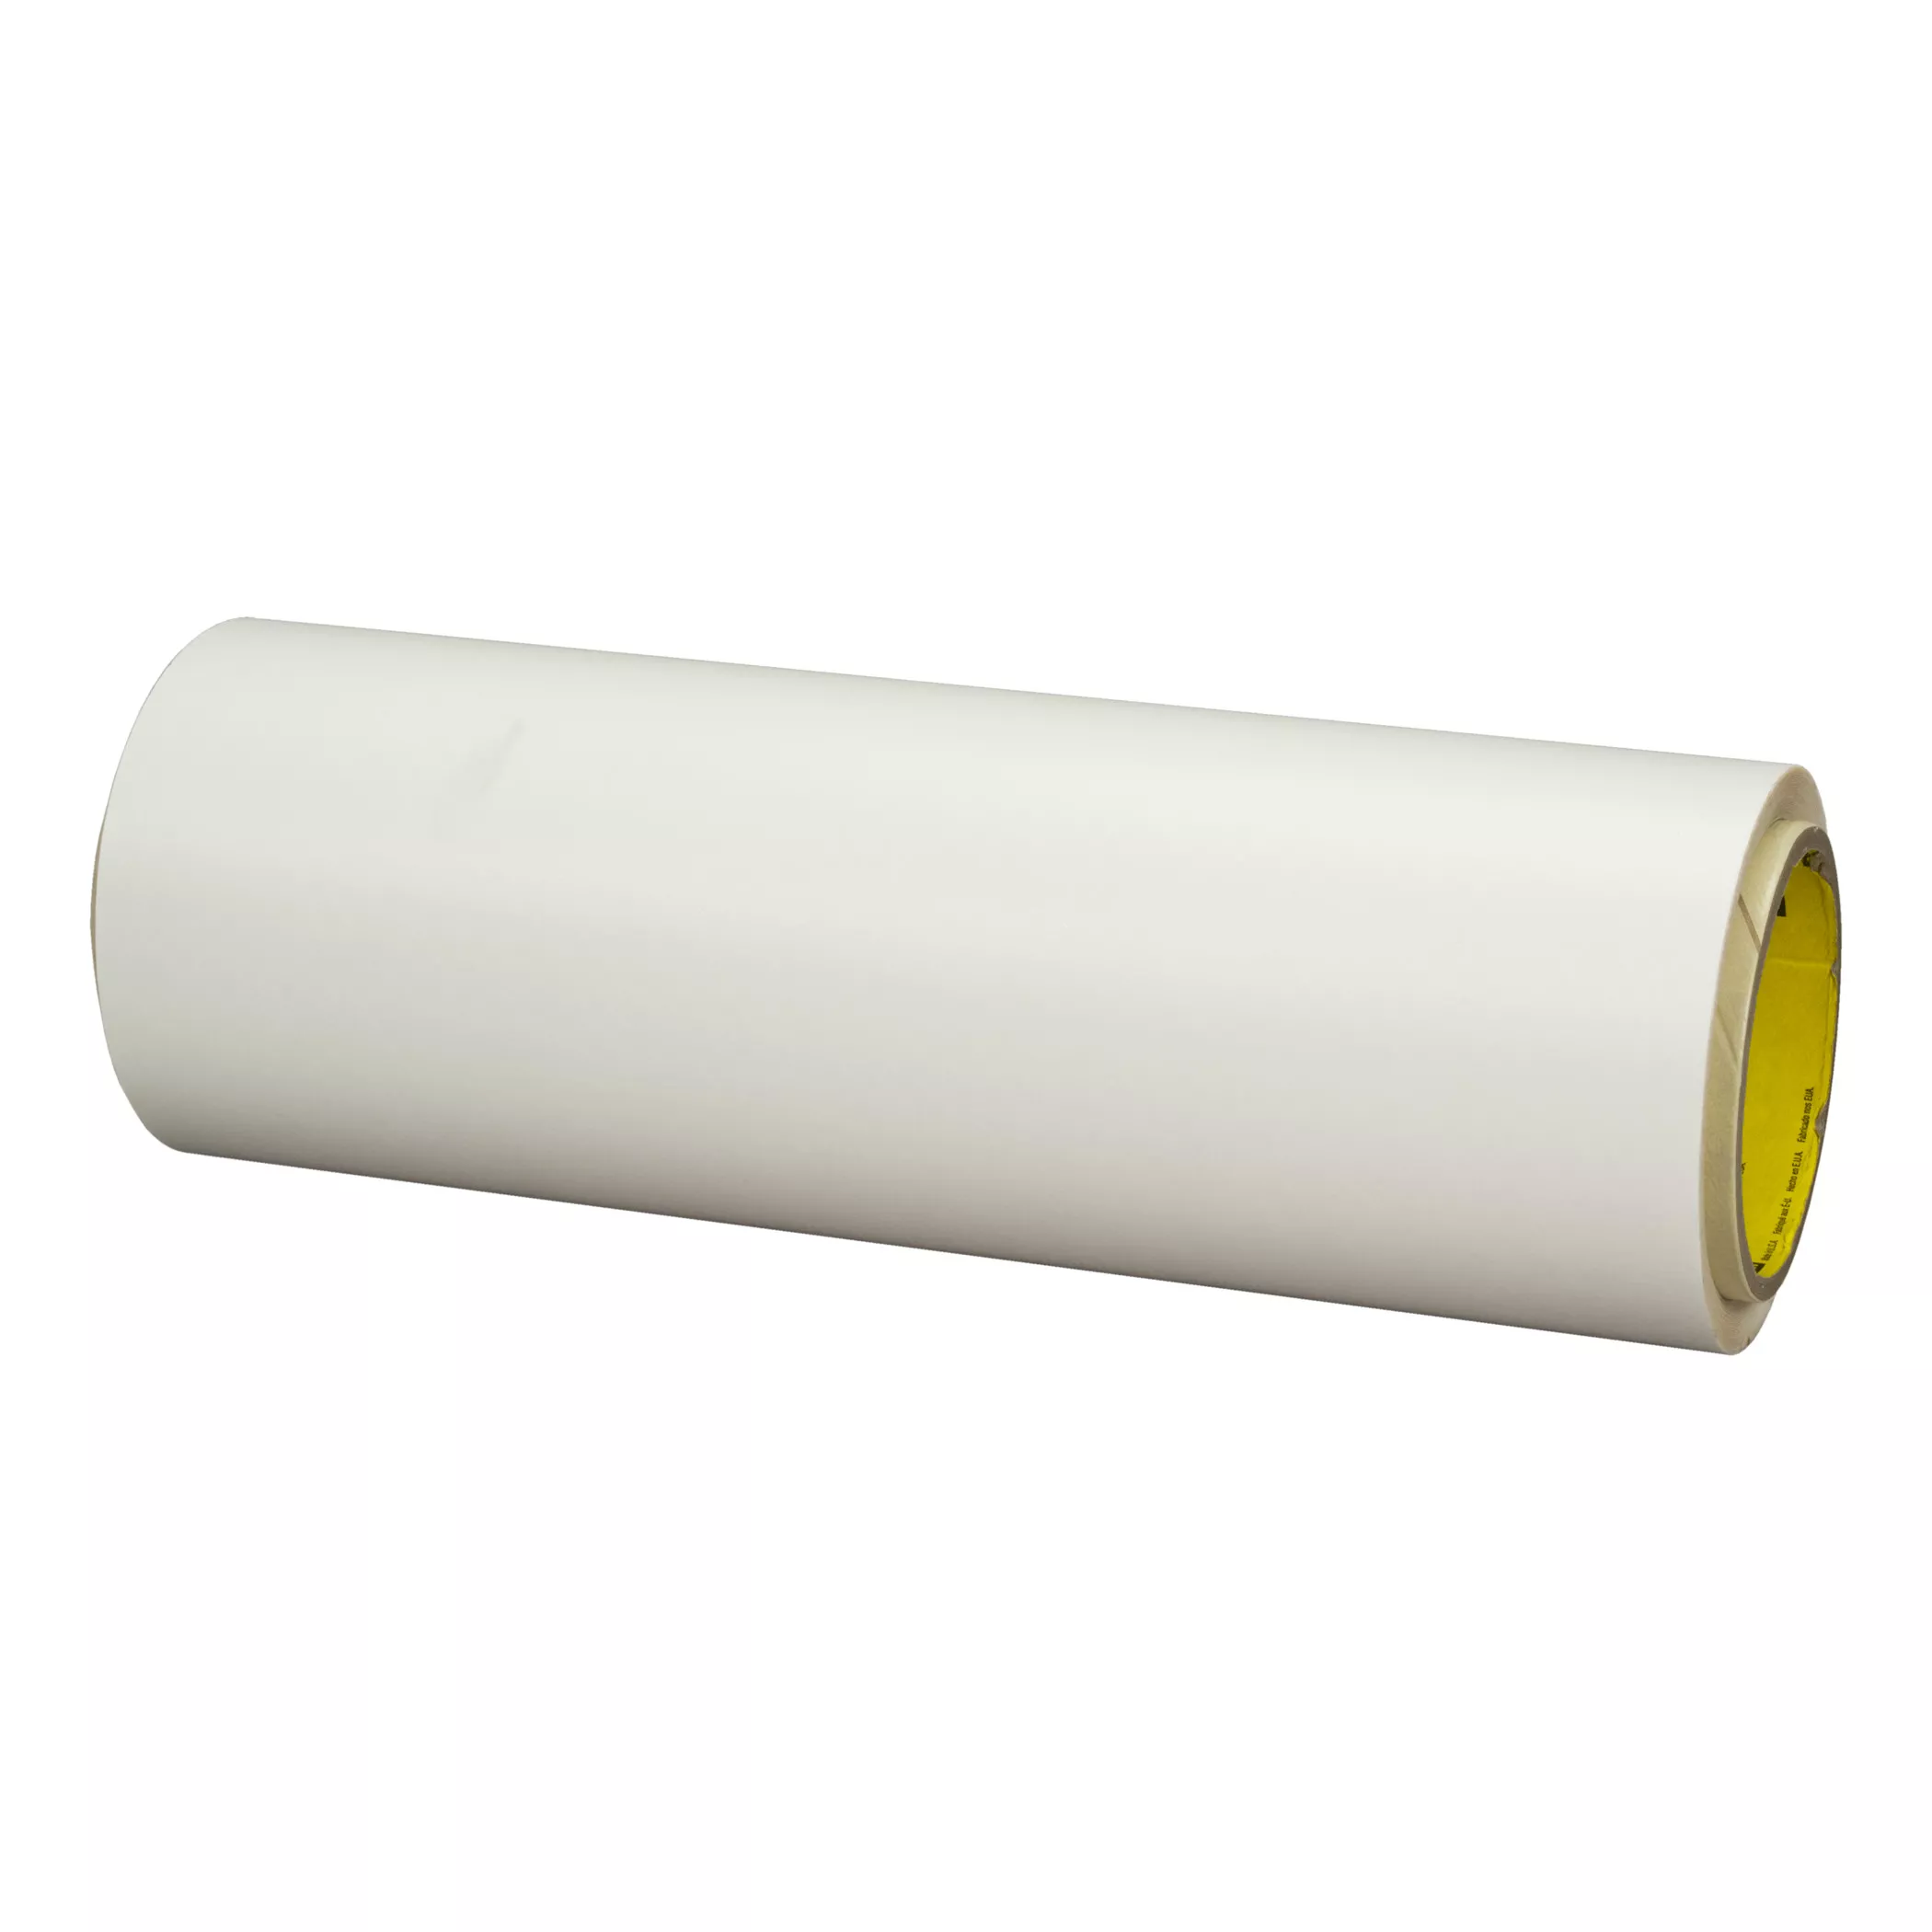 3M™ Adhesive Transfer Tape 9775WL, Clear, 54 in x 180 yd, 5 mil, 1
Roll/Case